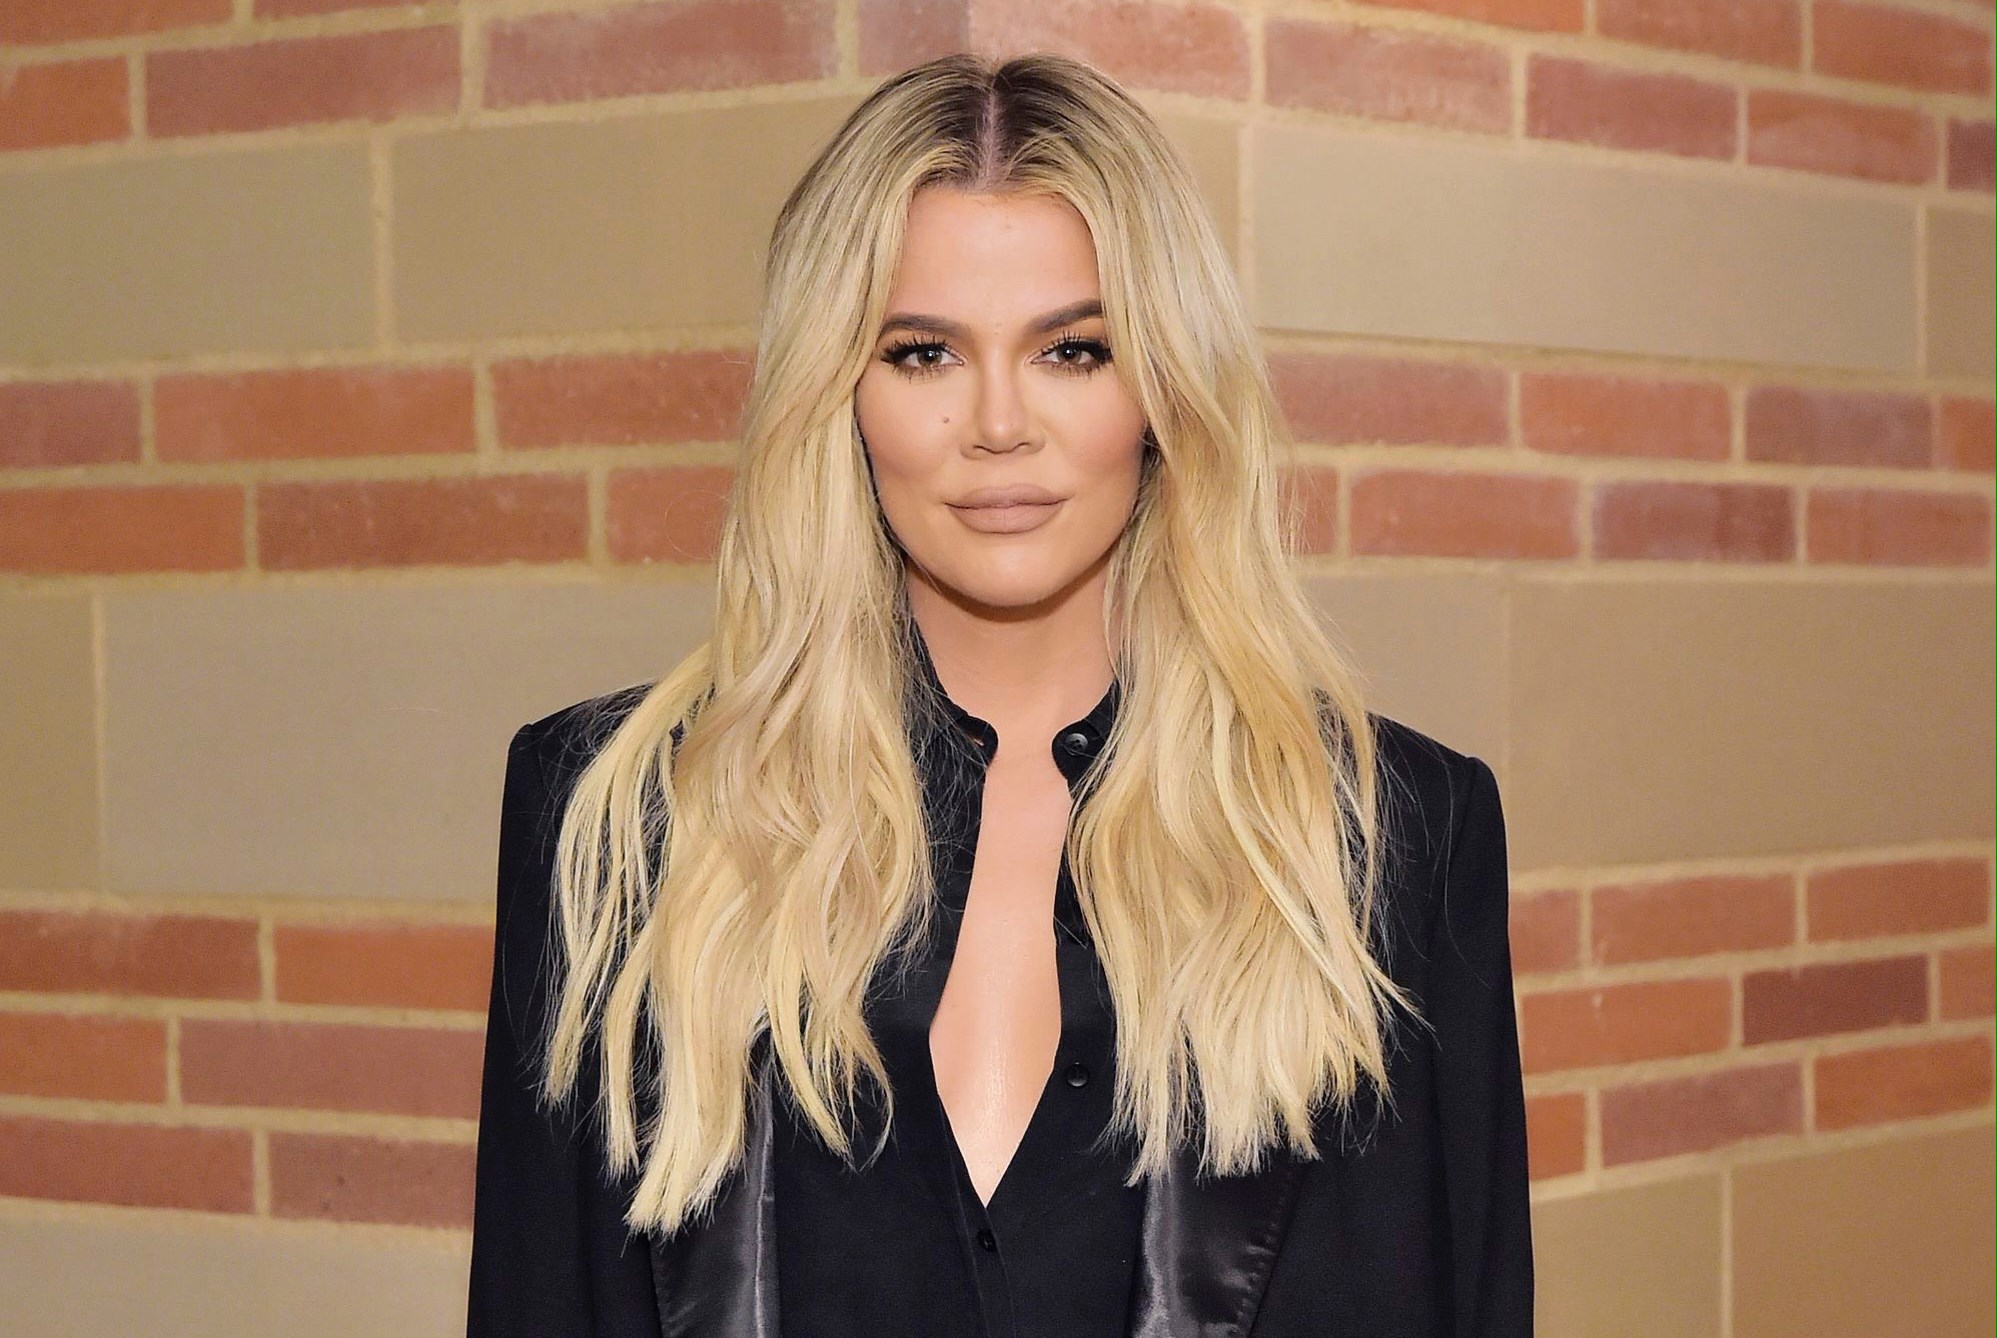 Khloe Kardashian attends The Promise Armenian Institute Event At UCLA at Royce Hall on November 19, 2019 in Los Angeles.Stefanie Keenan / Getty Images file